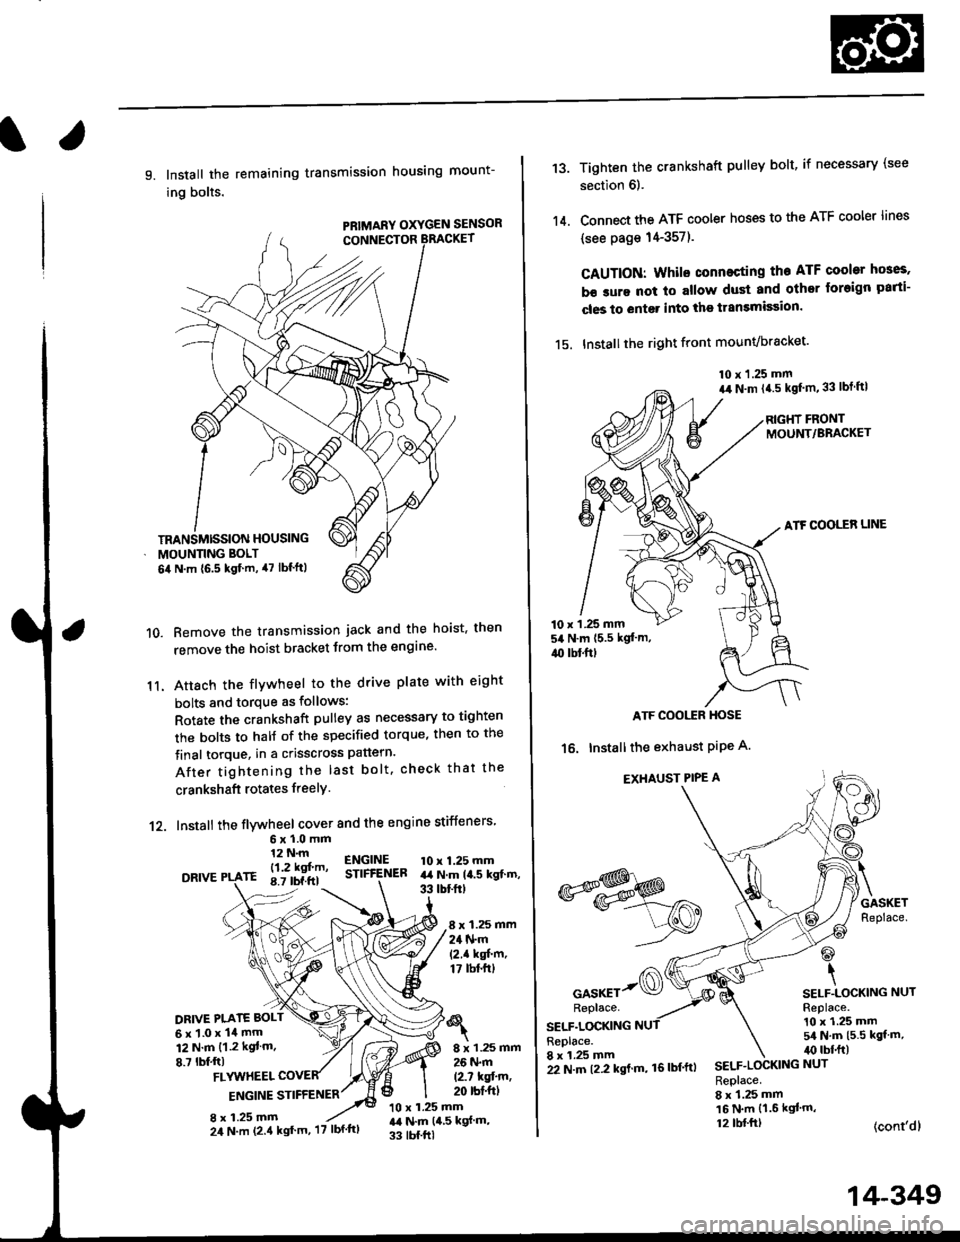 HONDA CIVIC 1998 6.G Workshop Manual l.
9. Install the remaining transmission housing mount-
ing bolts.
PRIMARY OXYGEN SENSOR
Remove the transmission jack and the hoist. then
remove the hoist bracket from the engine
Attach the flvwheel 